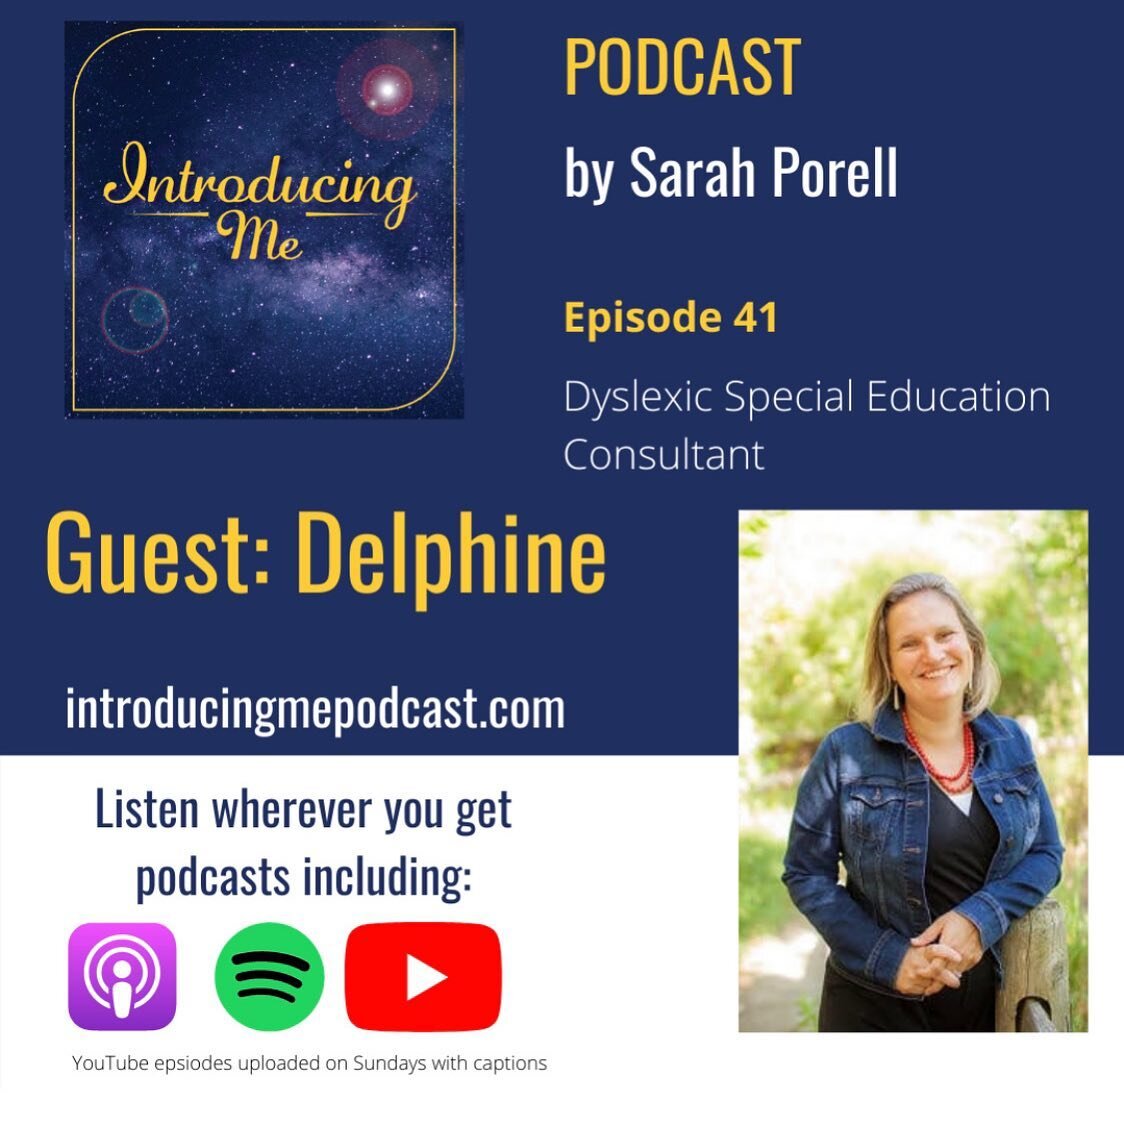 Today my episode with Sarah is out. On her podcast @introducingmepodcast we talk about my diagnosis of Dyslexia, how I came to understand my children&rsquo;s learning differences and how I work with families.  Check her out to get the link to the epi